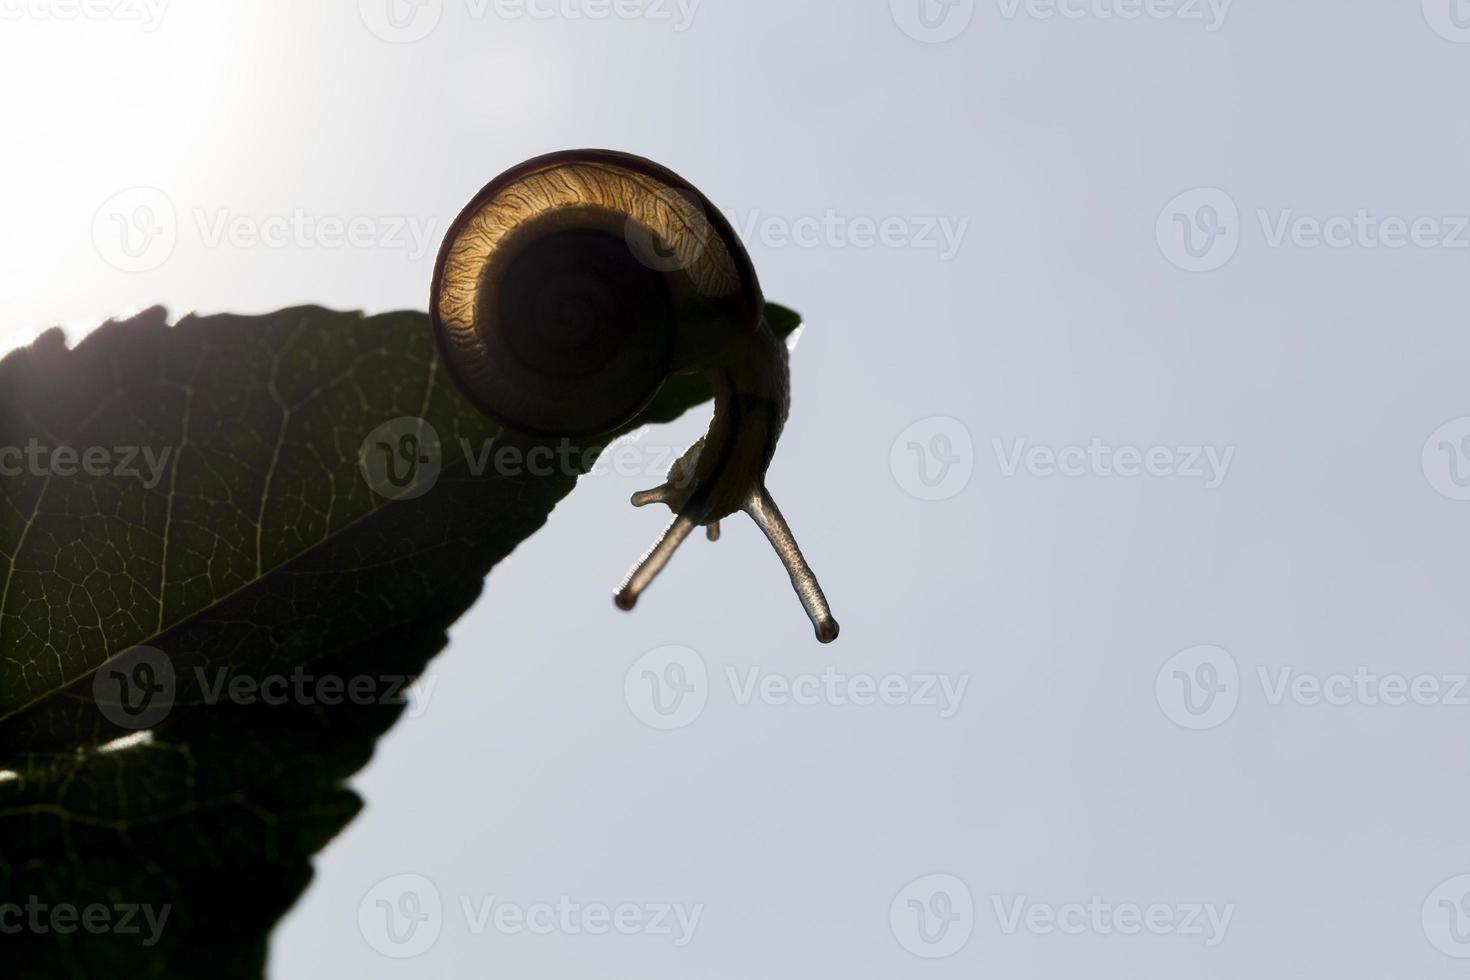 common wild snail crawling on rocks and illuminated by sunlight photo